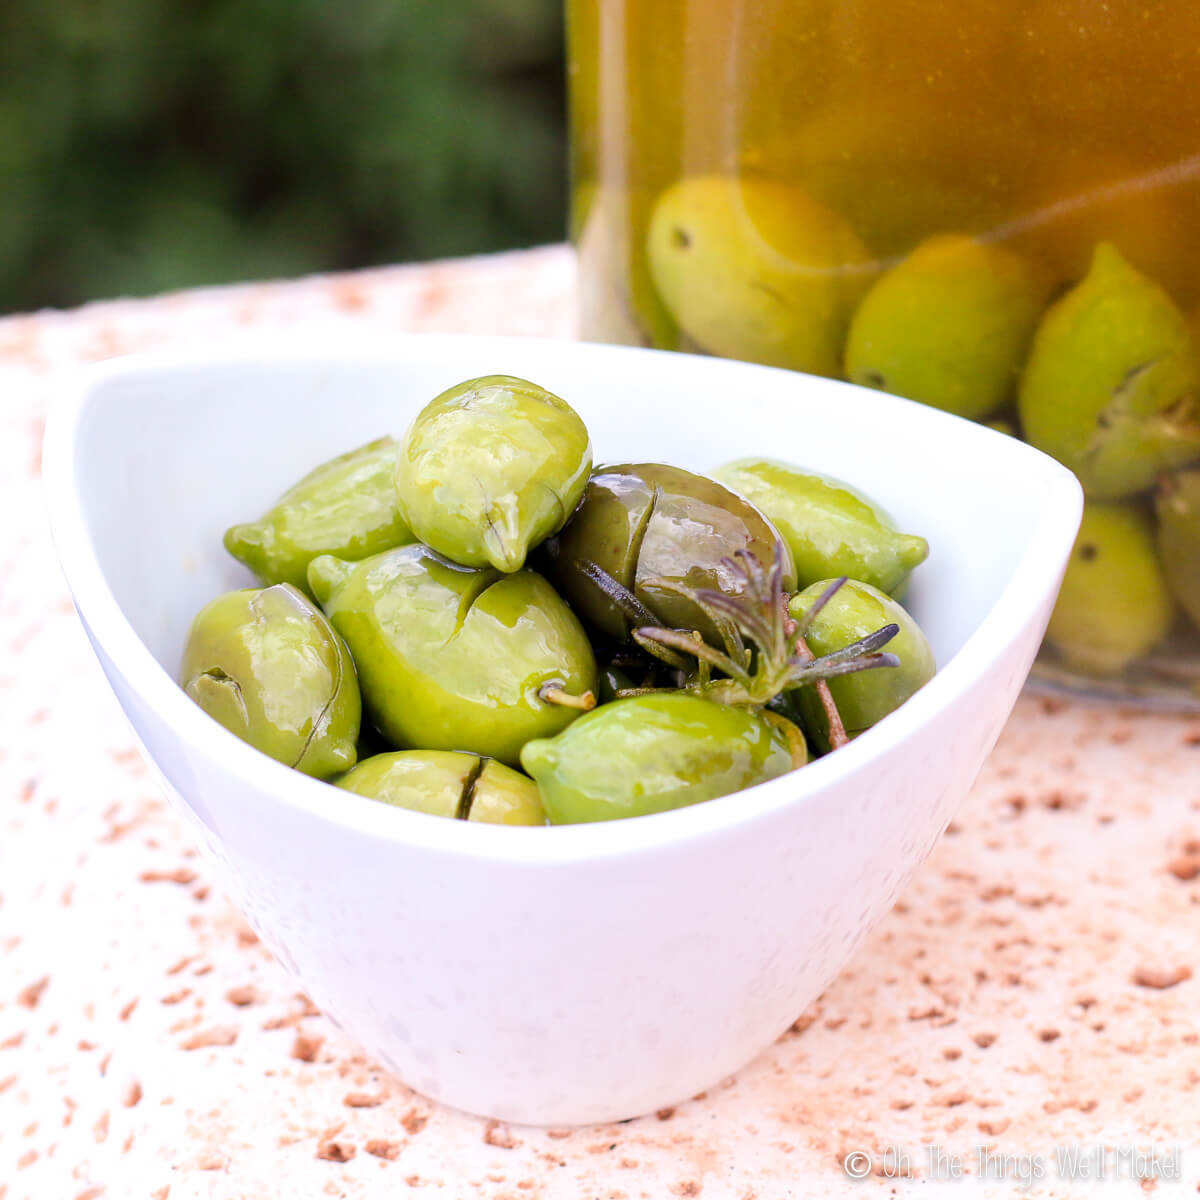 Are olives too salty to be healthy